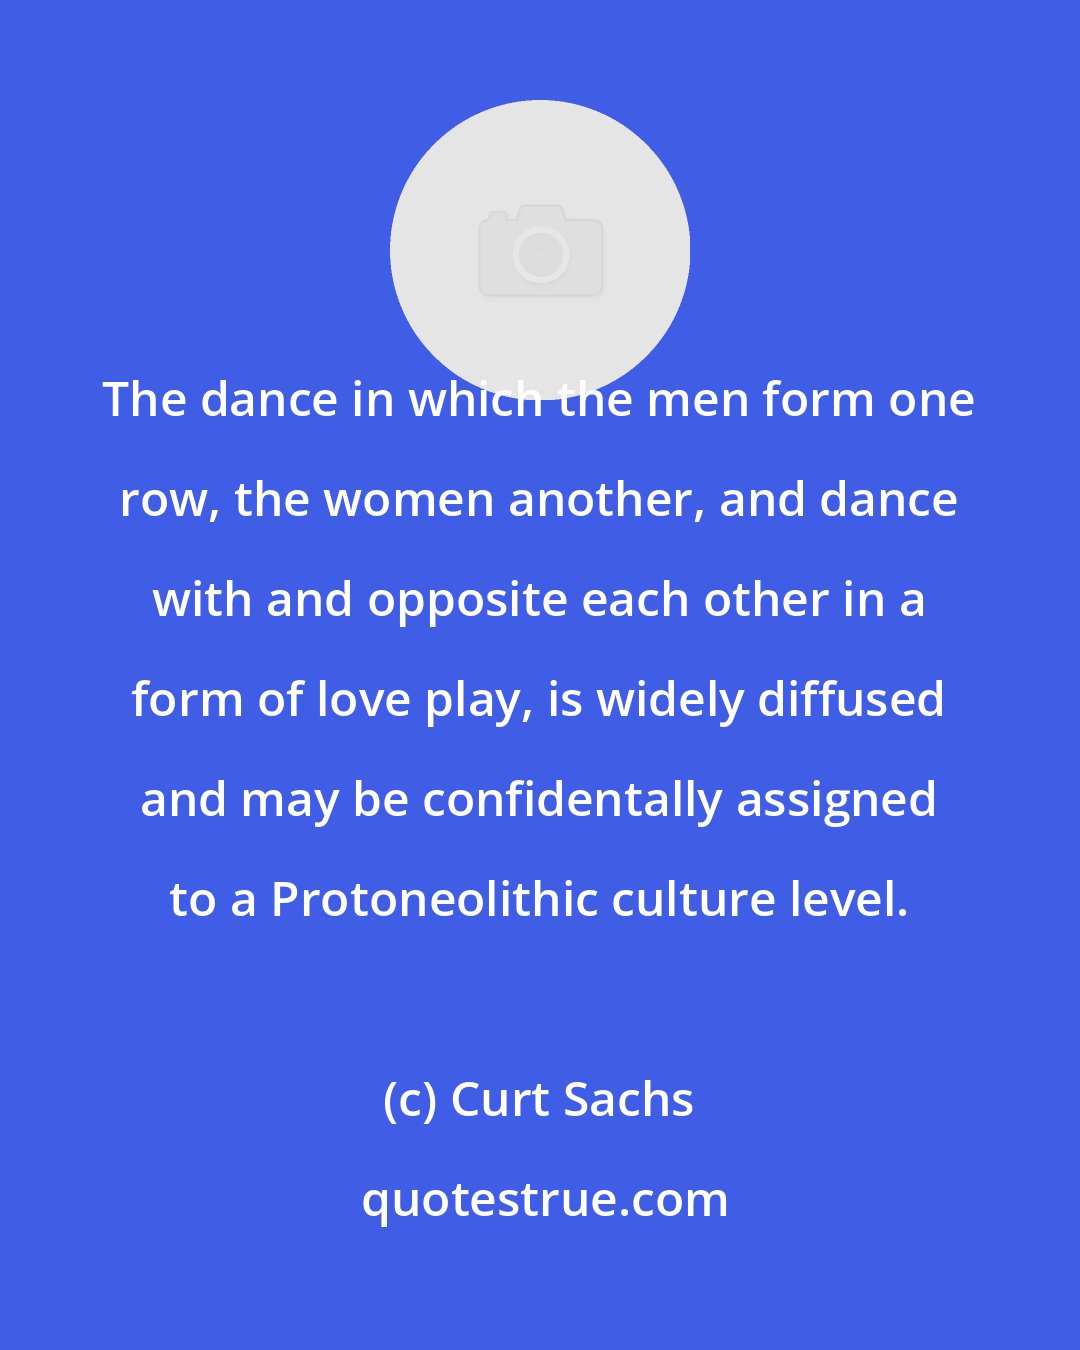 Curt Sachs: The dance in which the men form one row, the women another, and dance with and opposite each other in a form of love play, is widely diffused and may be confidentally assigned to a Protoneolithic culture level.